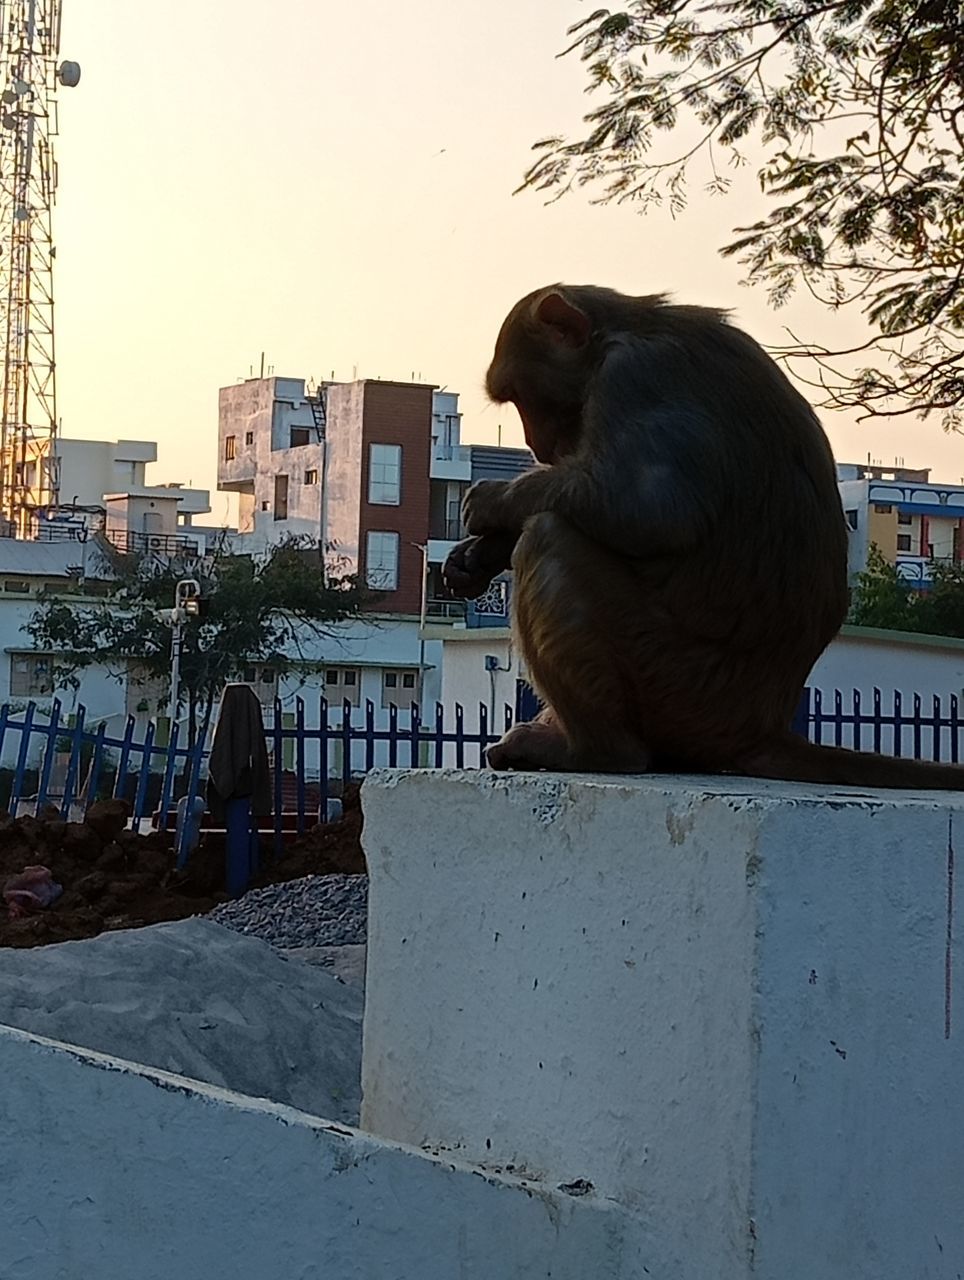 architecture, art, sculpture, city, statue, built structure, animal, building exterior, animal themes, sky, nature, one person, mammal, tree, primate, monkey, one animal, outdoors, blue, adult, temple, monument, day